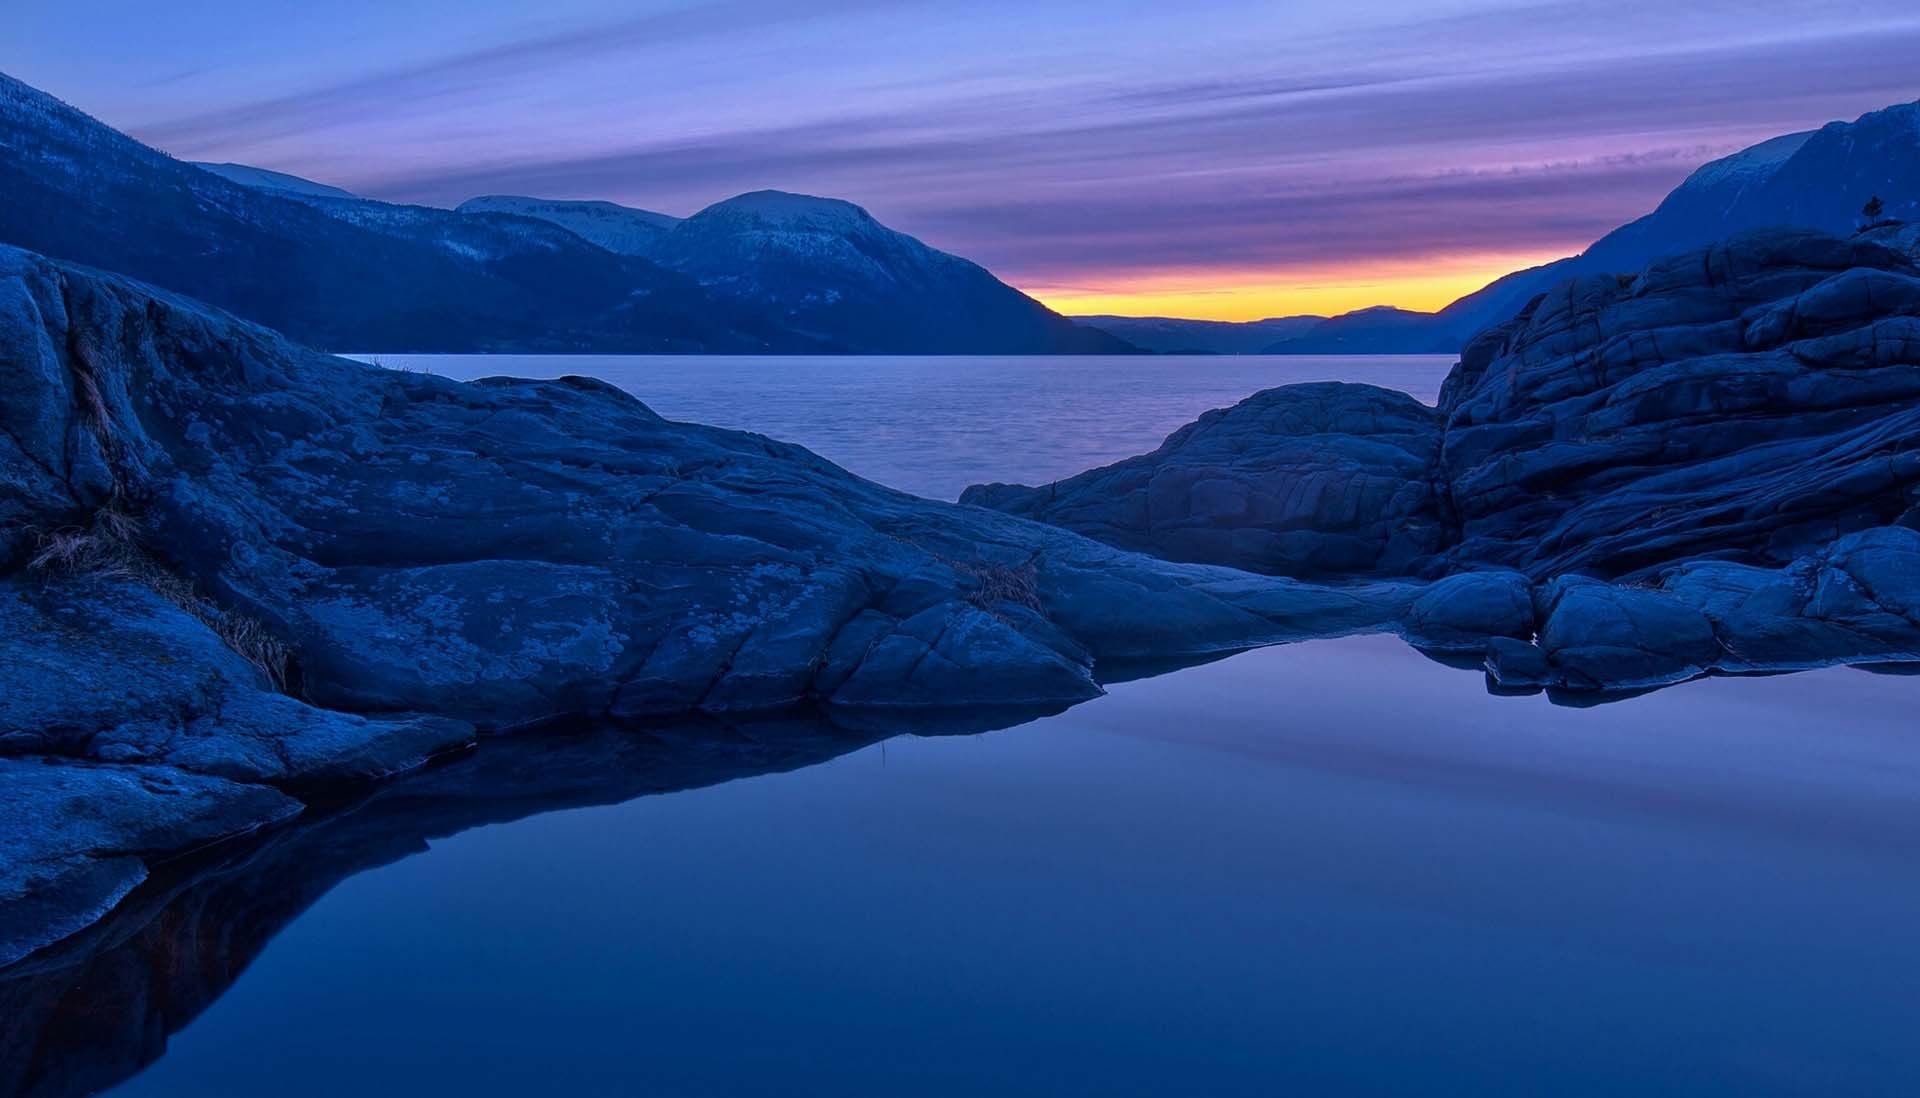 Blue Rocks And The Sea Wallpaper - Fjord Mountains Hd Background - HD Wallpaper 